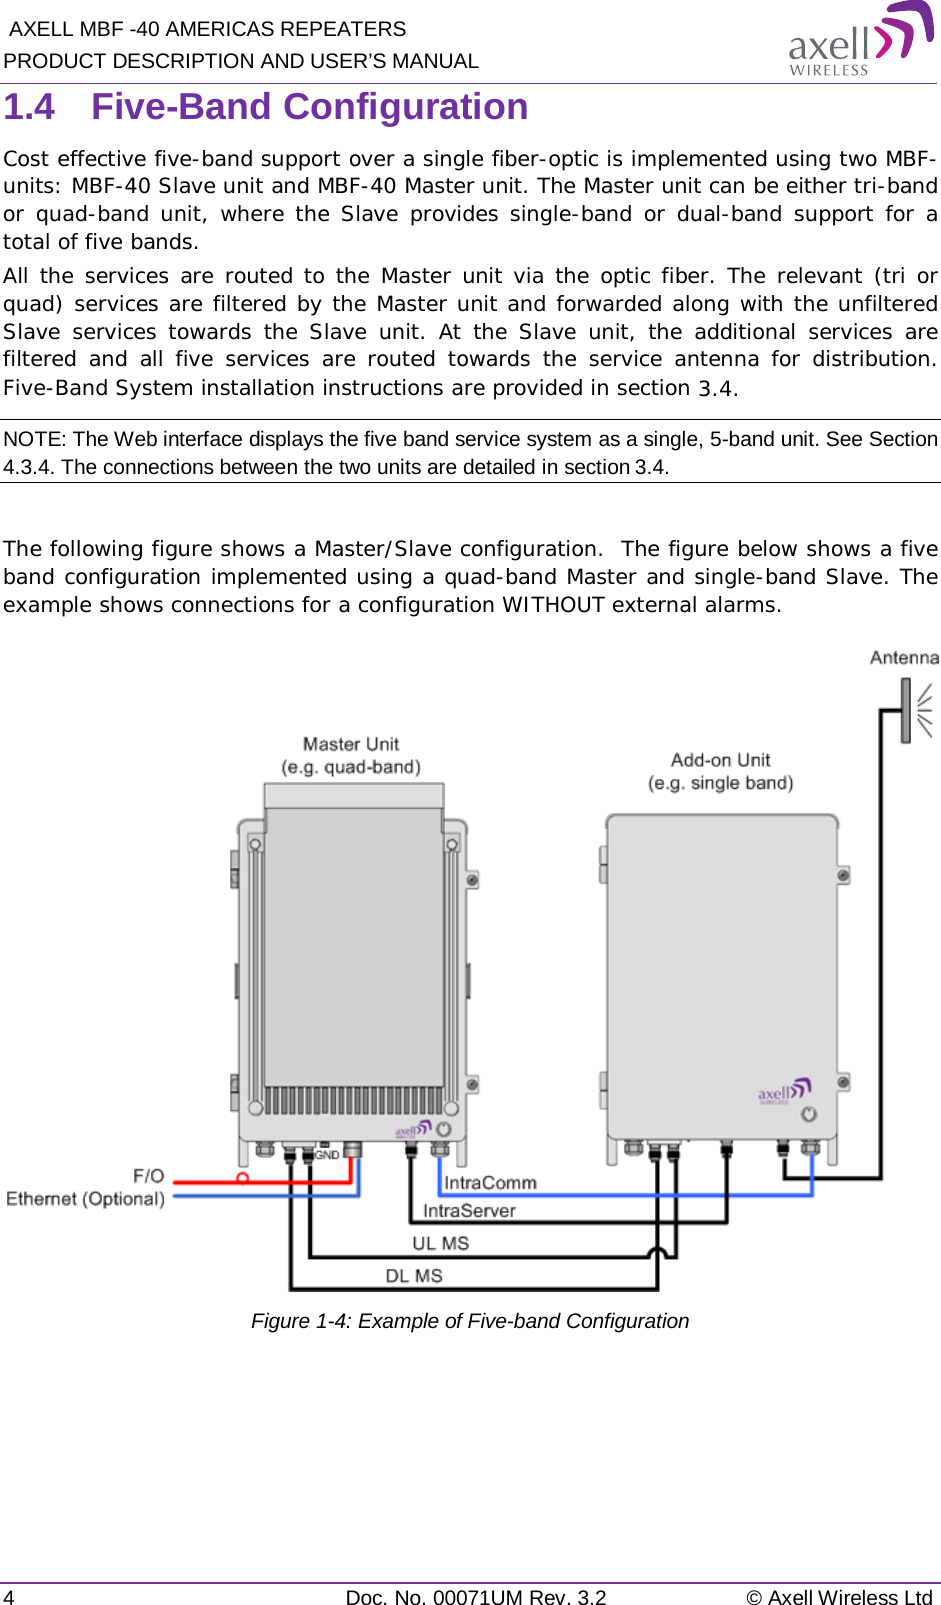  AXELL MBF -40 AMERICAS REPEATERS PRODUCT DESCRIPTION AND USER’S MANUAL 4  Doc. No. 00071UM Rev. 3.2 © Axell Wireless Ltd 1.4  Five-Band Configuration Cost effective five-band support over a single fiber-optic is implemented using two MBF-units: MBF-40 Slave unit and MBF-40 Master unit. The Master unit can be either tri-band or quad-band unit, where the Slave provides single-band or dual-band support for a total of five bands. All the services are routed to the Master unit via the optic fiber. The relevant (tri or quad) services are filtered by the Master unit and forwarded along with the unfiltered Slave services towards the Slave unit. At the Slave unit, the additional services are filtered and all five services are routed towards the service antenna for distribution. Five-Band System installation instructions are provided in section  3.4. NOTE: The Web interface displays the five band service system as a single, 5-band unit. See Section  4.3.4. The connections between the two units are detailed in section  3.4.  The following figure shows a Master/Slave configuration.  The figure below shows a five band configuration implemented using a quad-band Master and single-band Slave. The example shows connections for a configuration WITHOUT external alarms.  Figure  1-4: Example of Five-band Configuration   